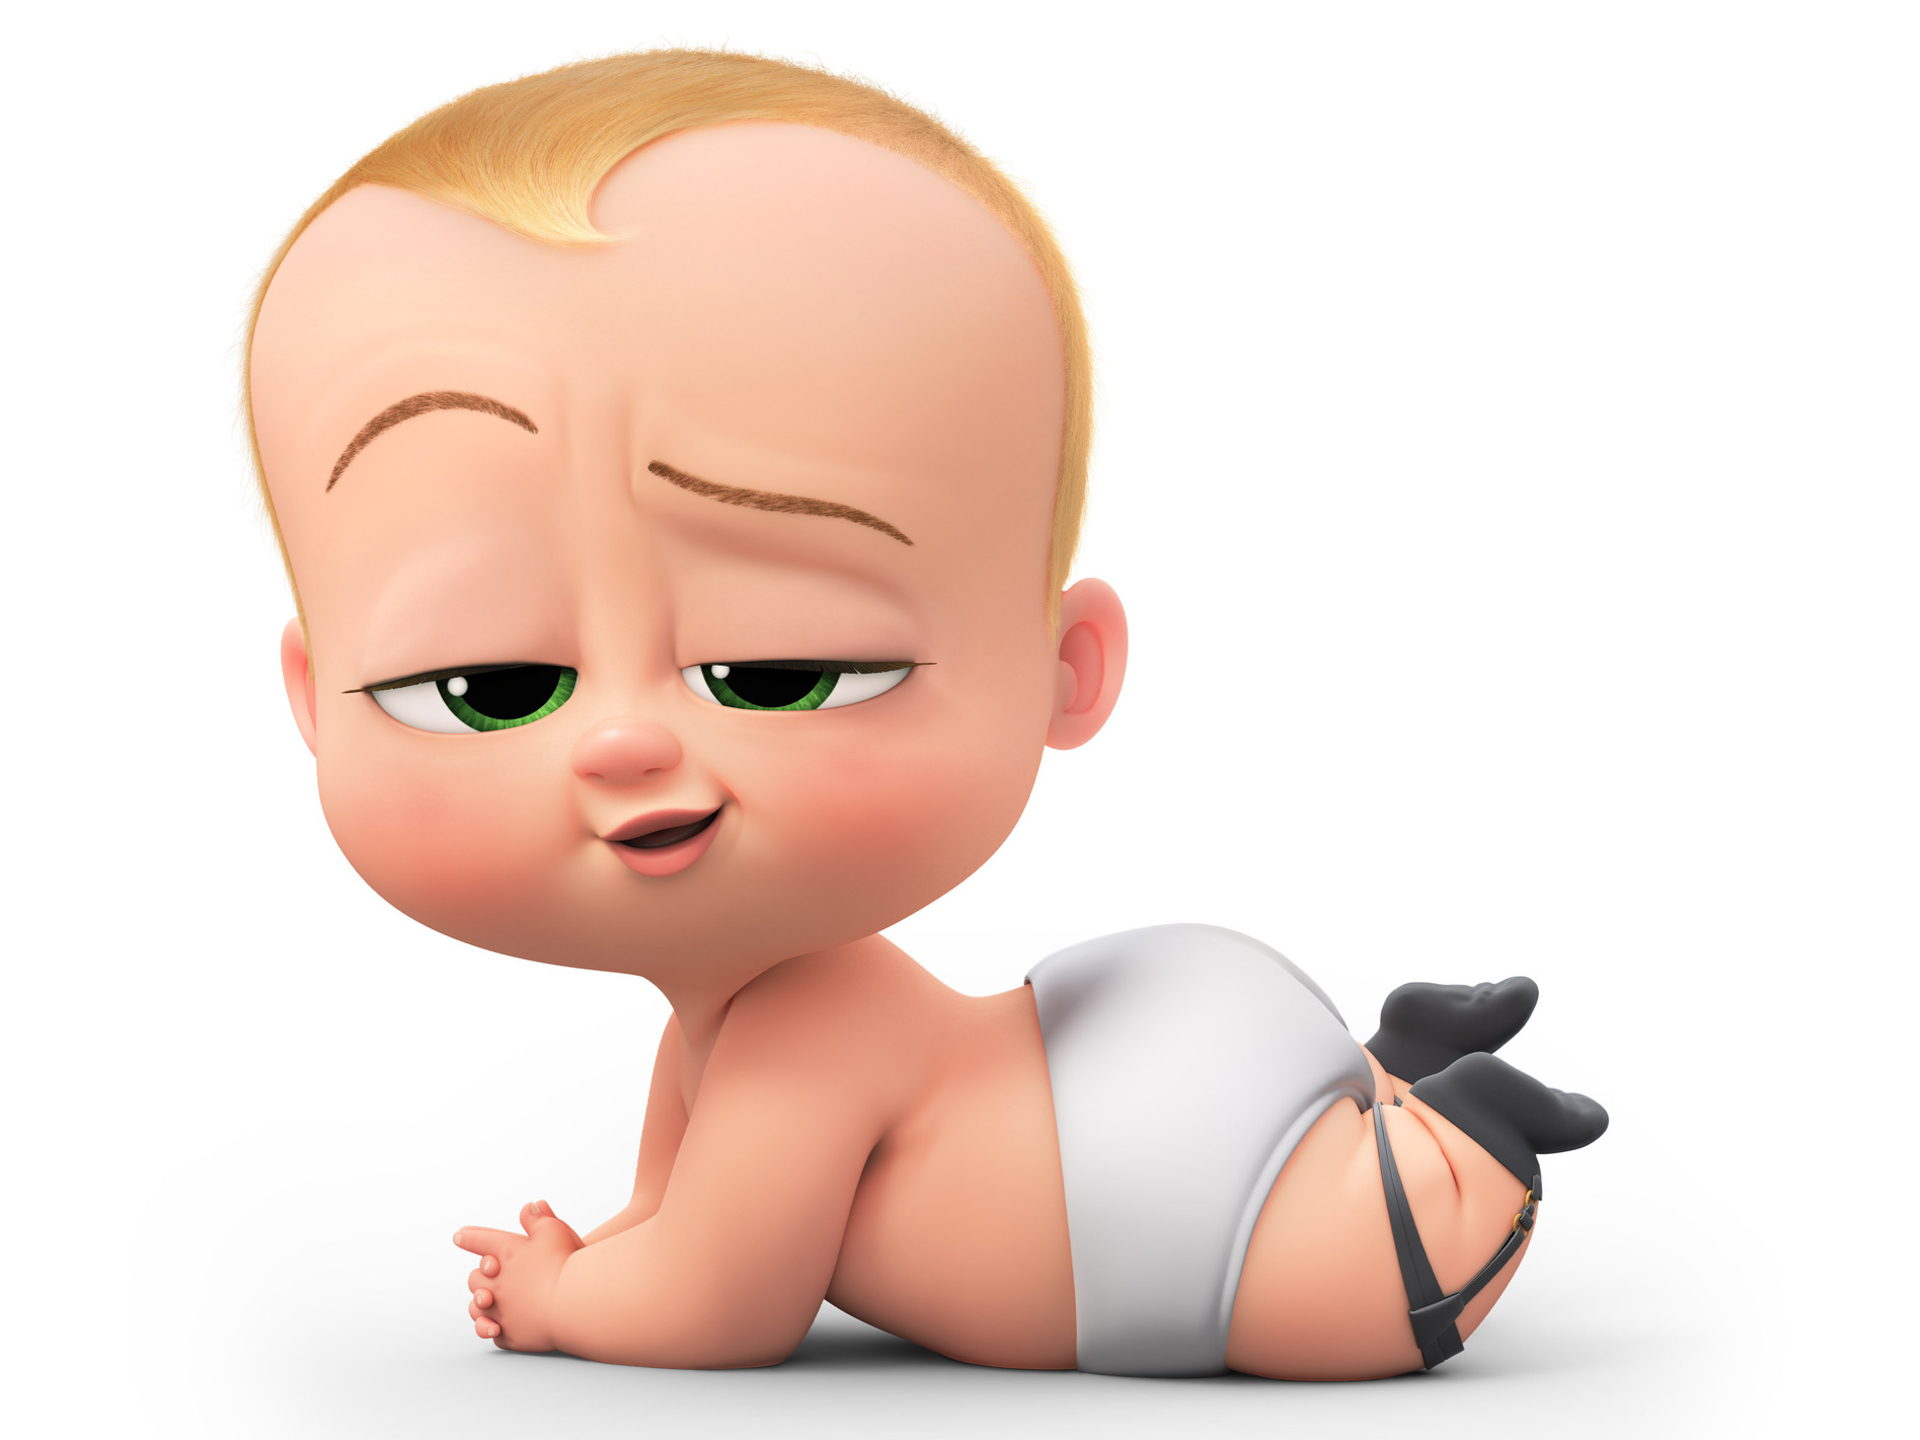 boss baby, the boss baby: family business, movie, theodore templeton